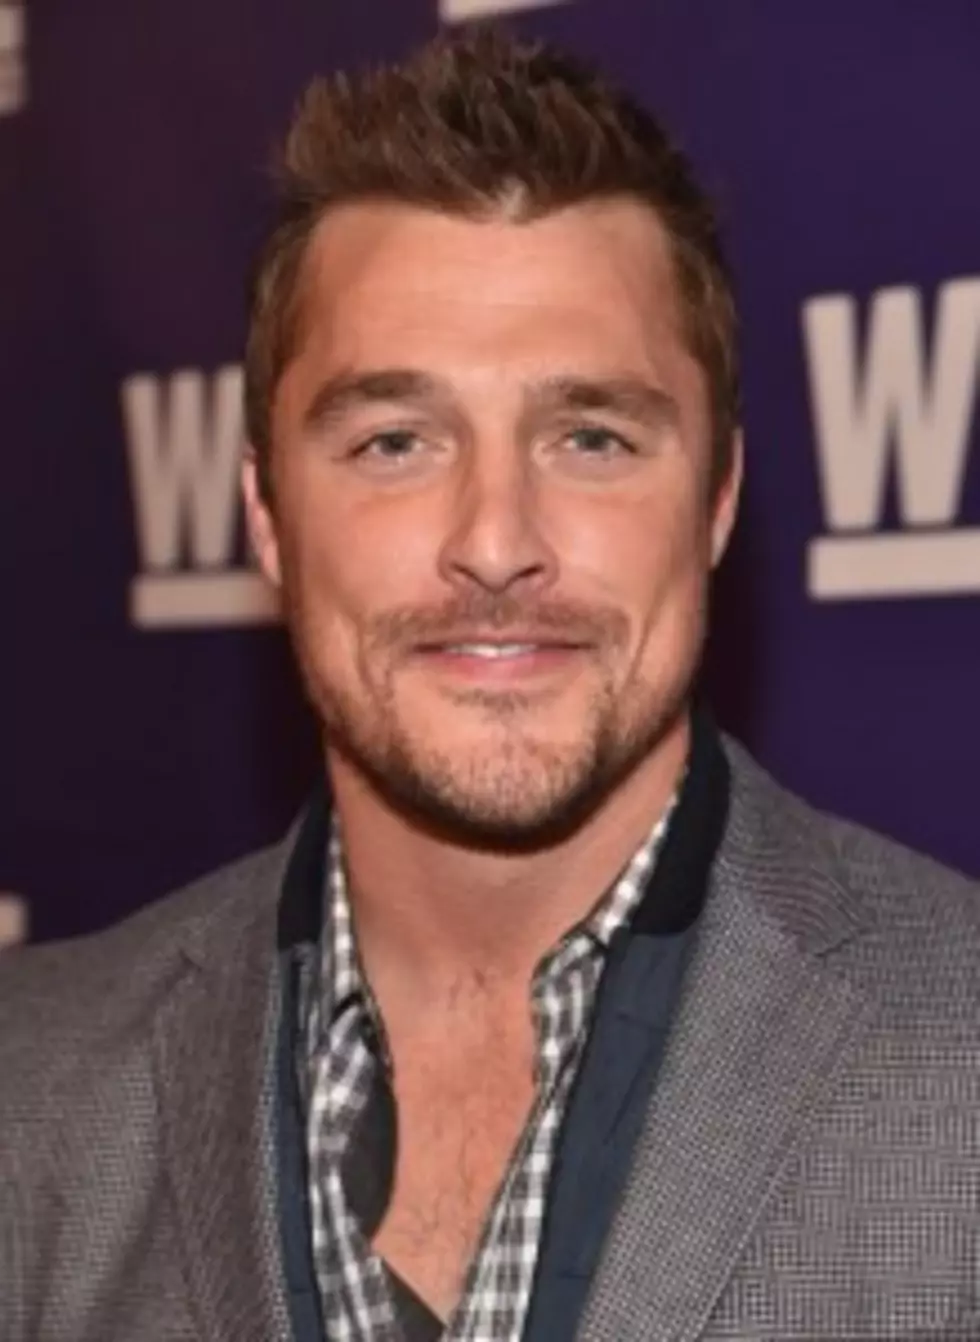 Fifth Annual Ladies Football Academy At Kinnick Stadium With Chris Soules